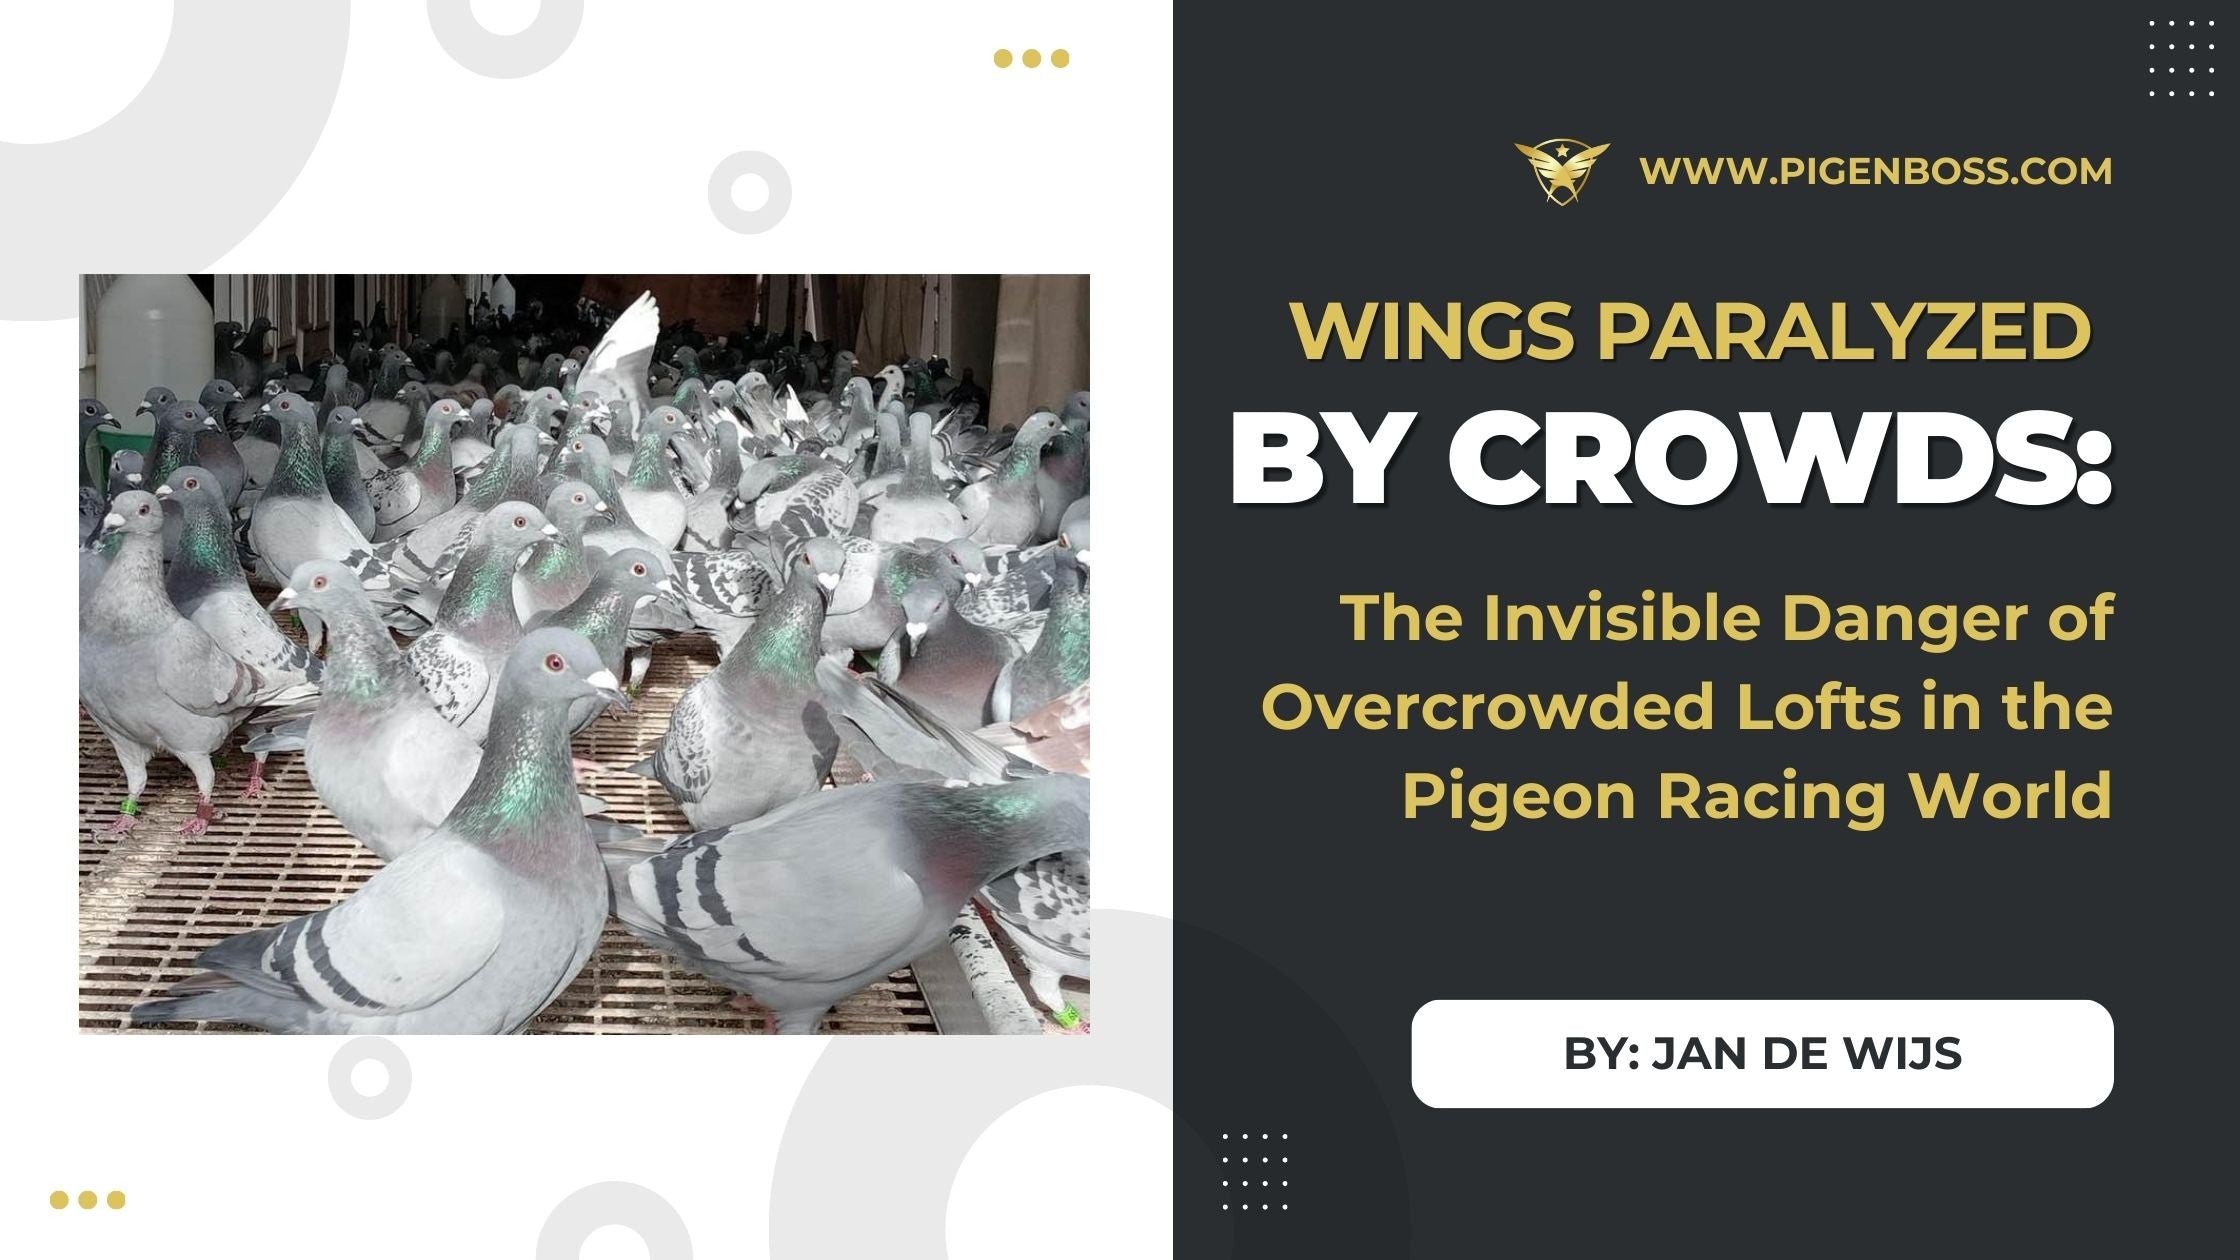 Wings Paralyzed by Crowds: The Invisible Danger of Overcrowded Lofts in the Pigeon Racing World